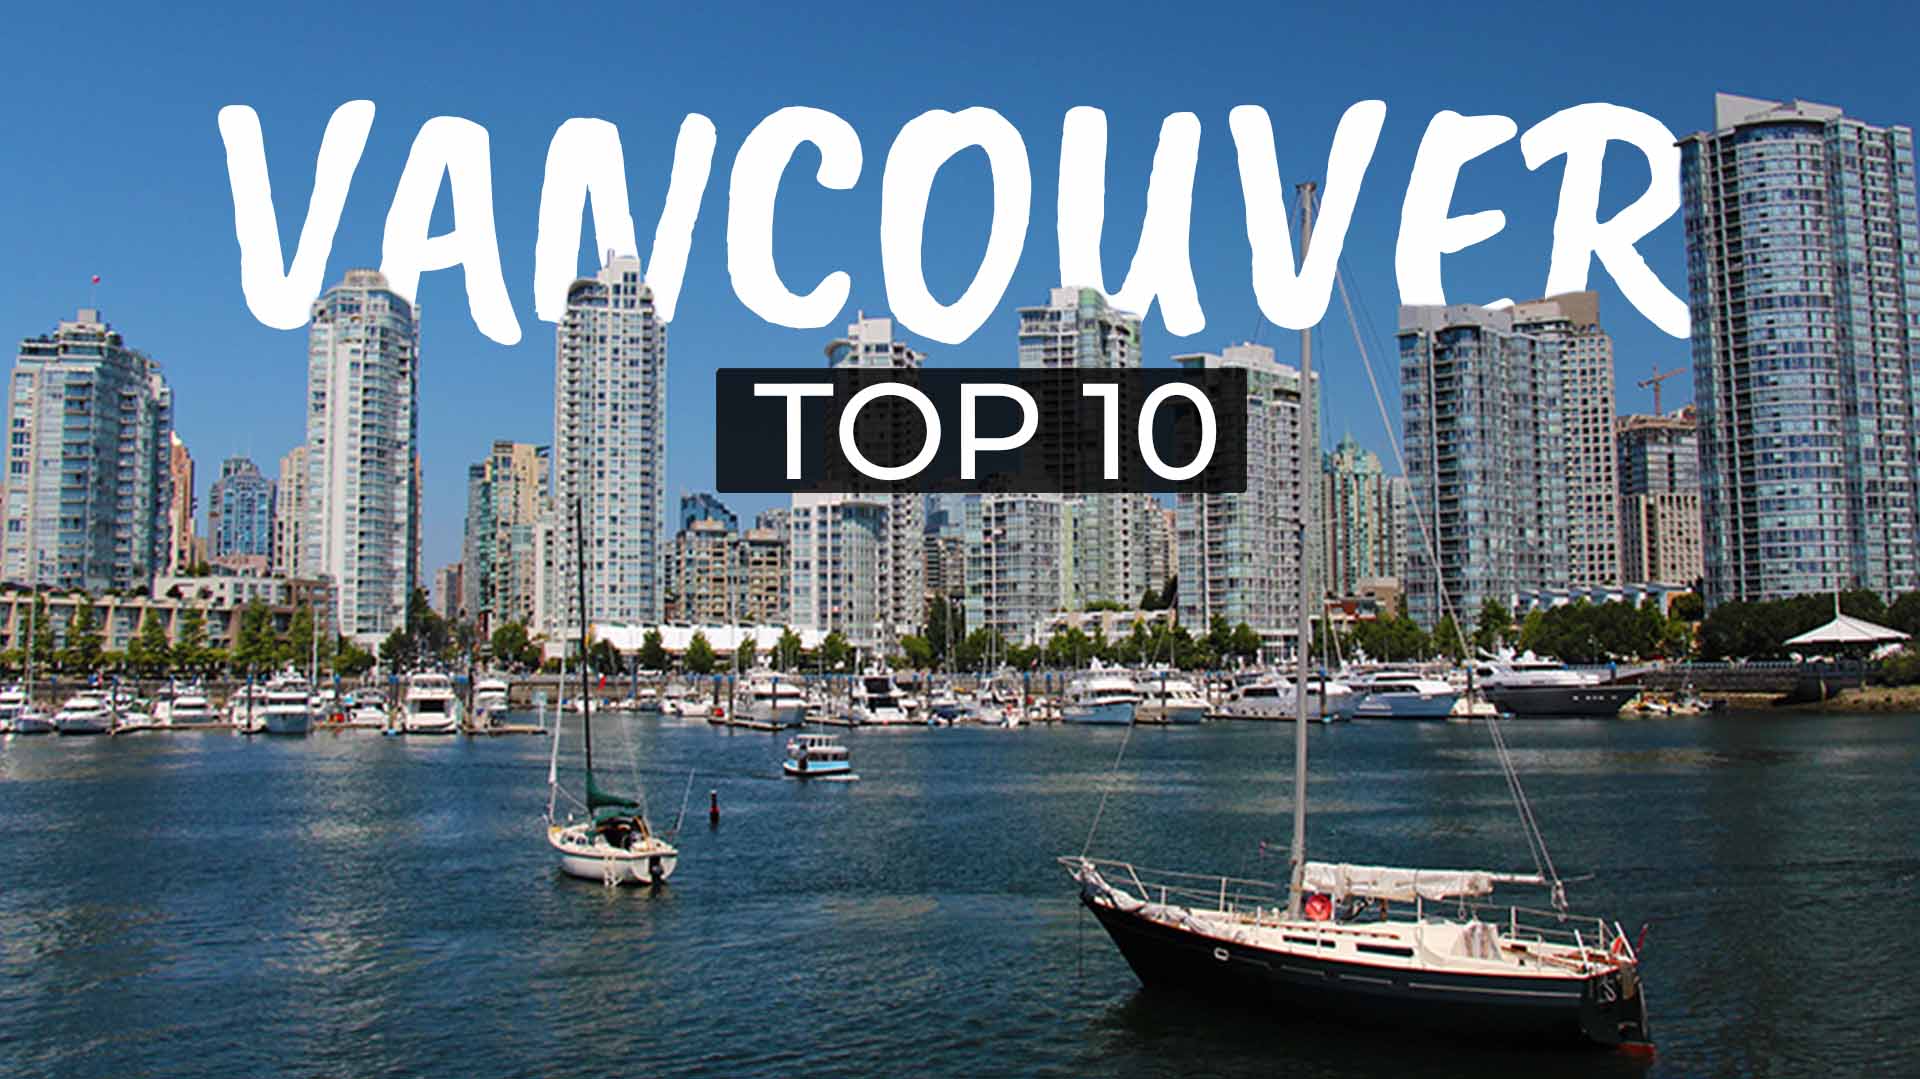 TOP 10 Sehenswürdigkeiten Vancouver - COVER